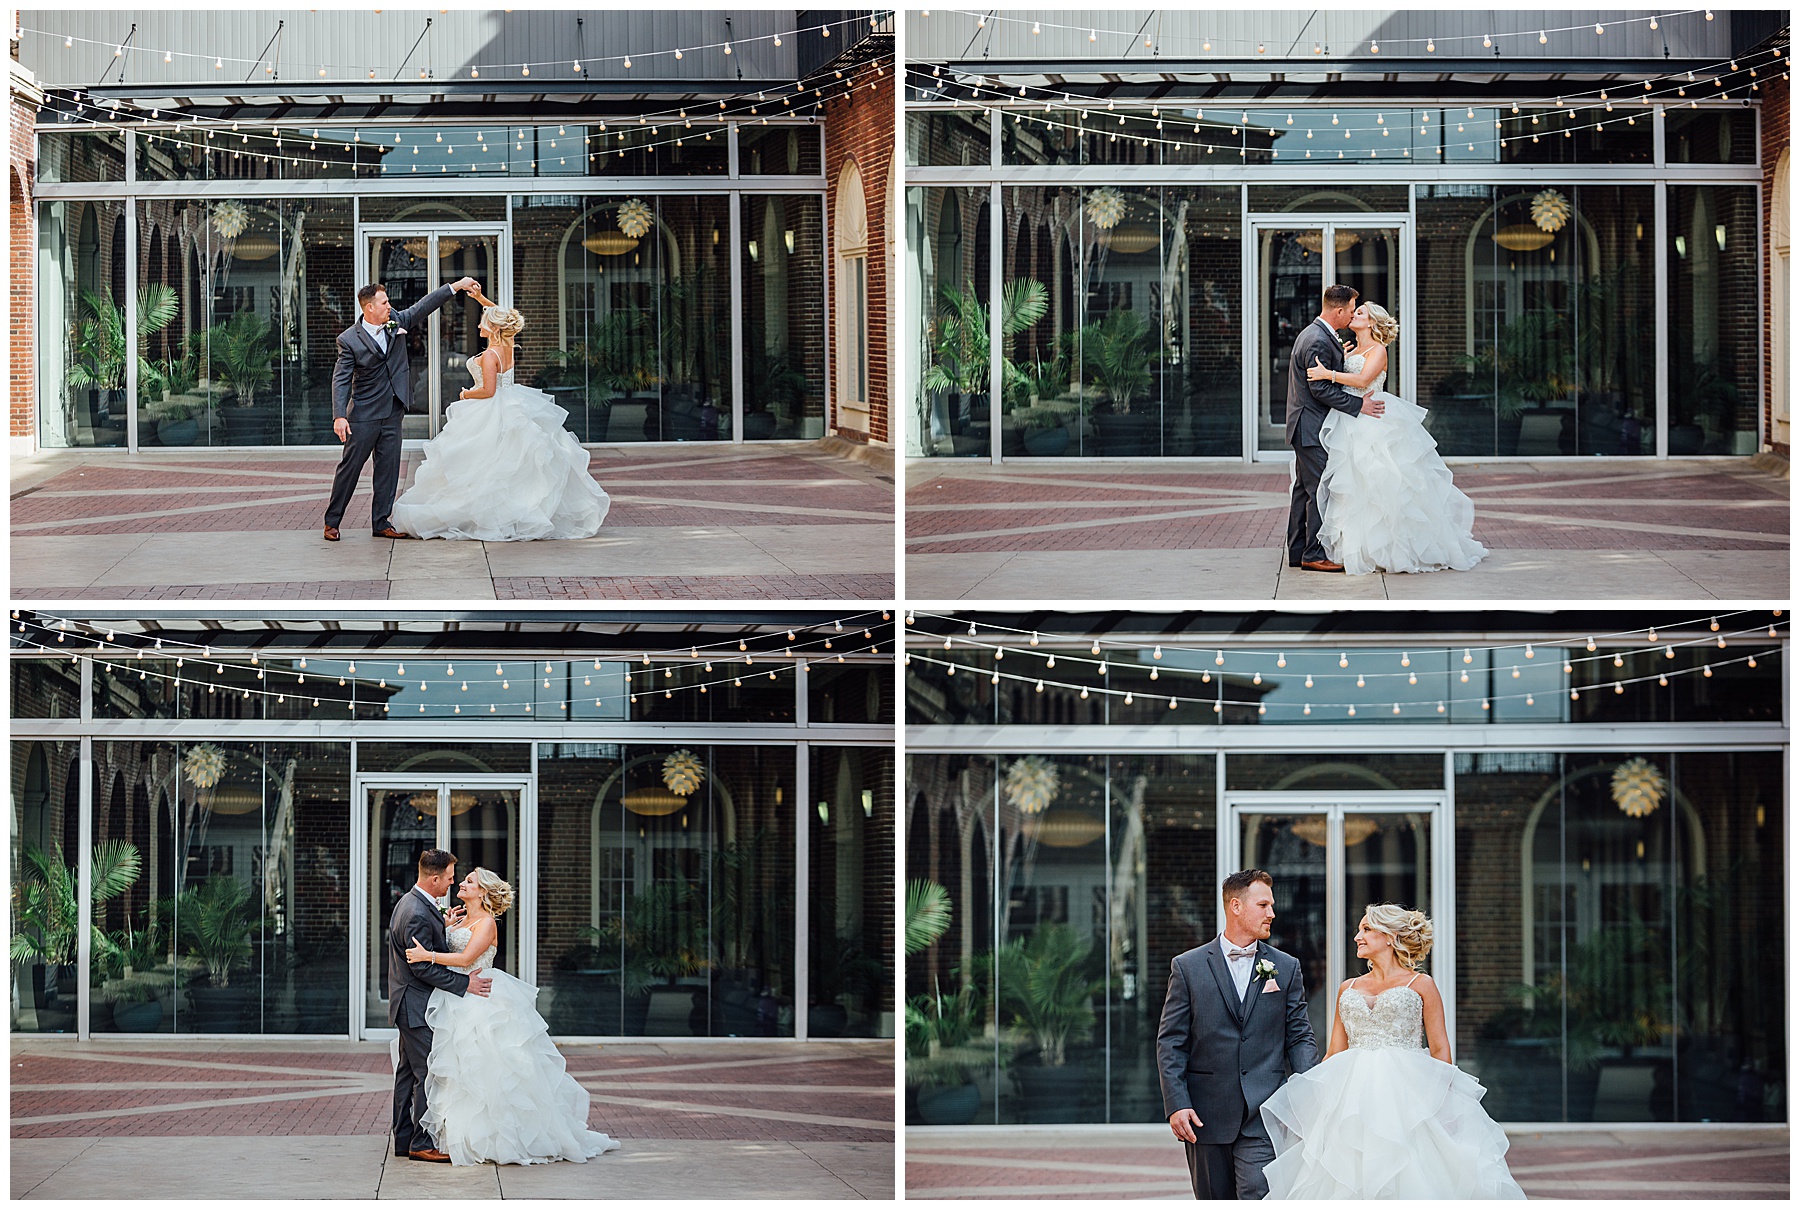 Bride and Groom in courtyard at Magnolia Hotel